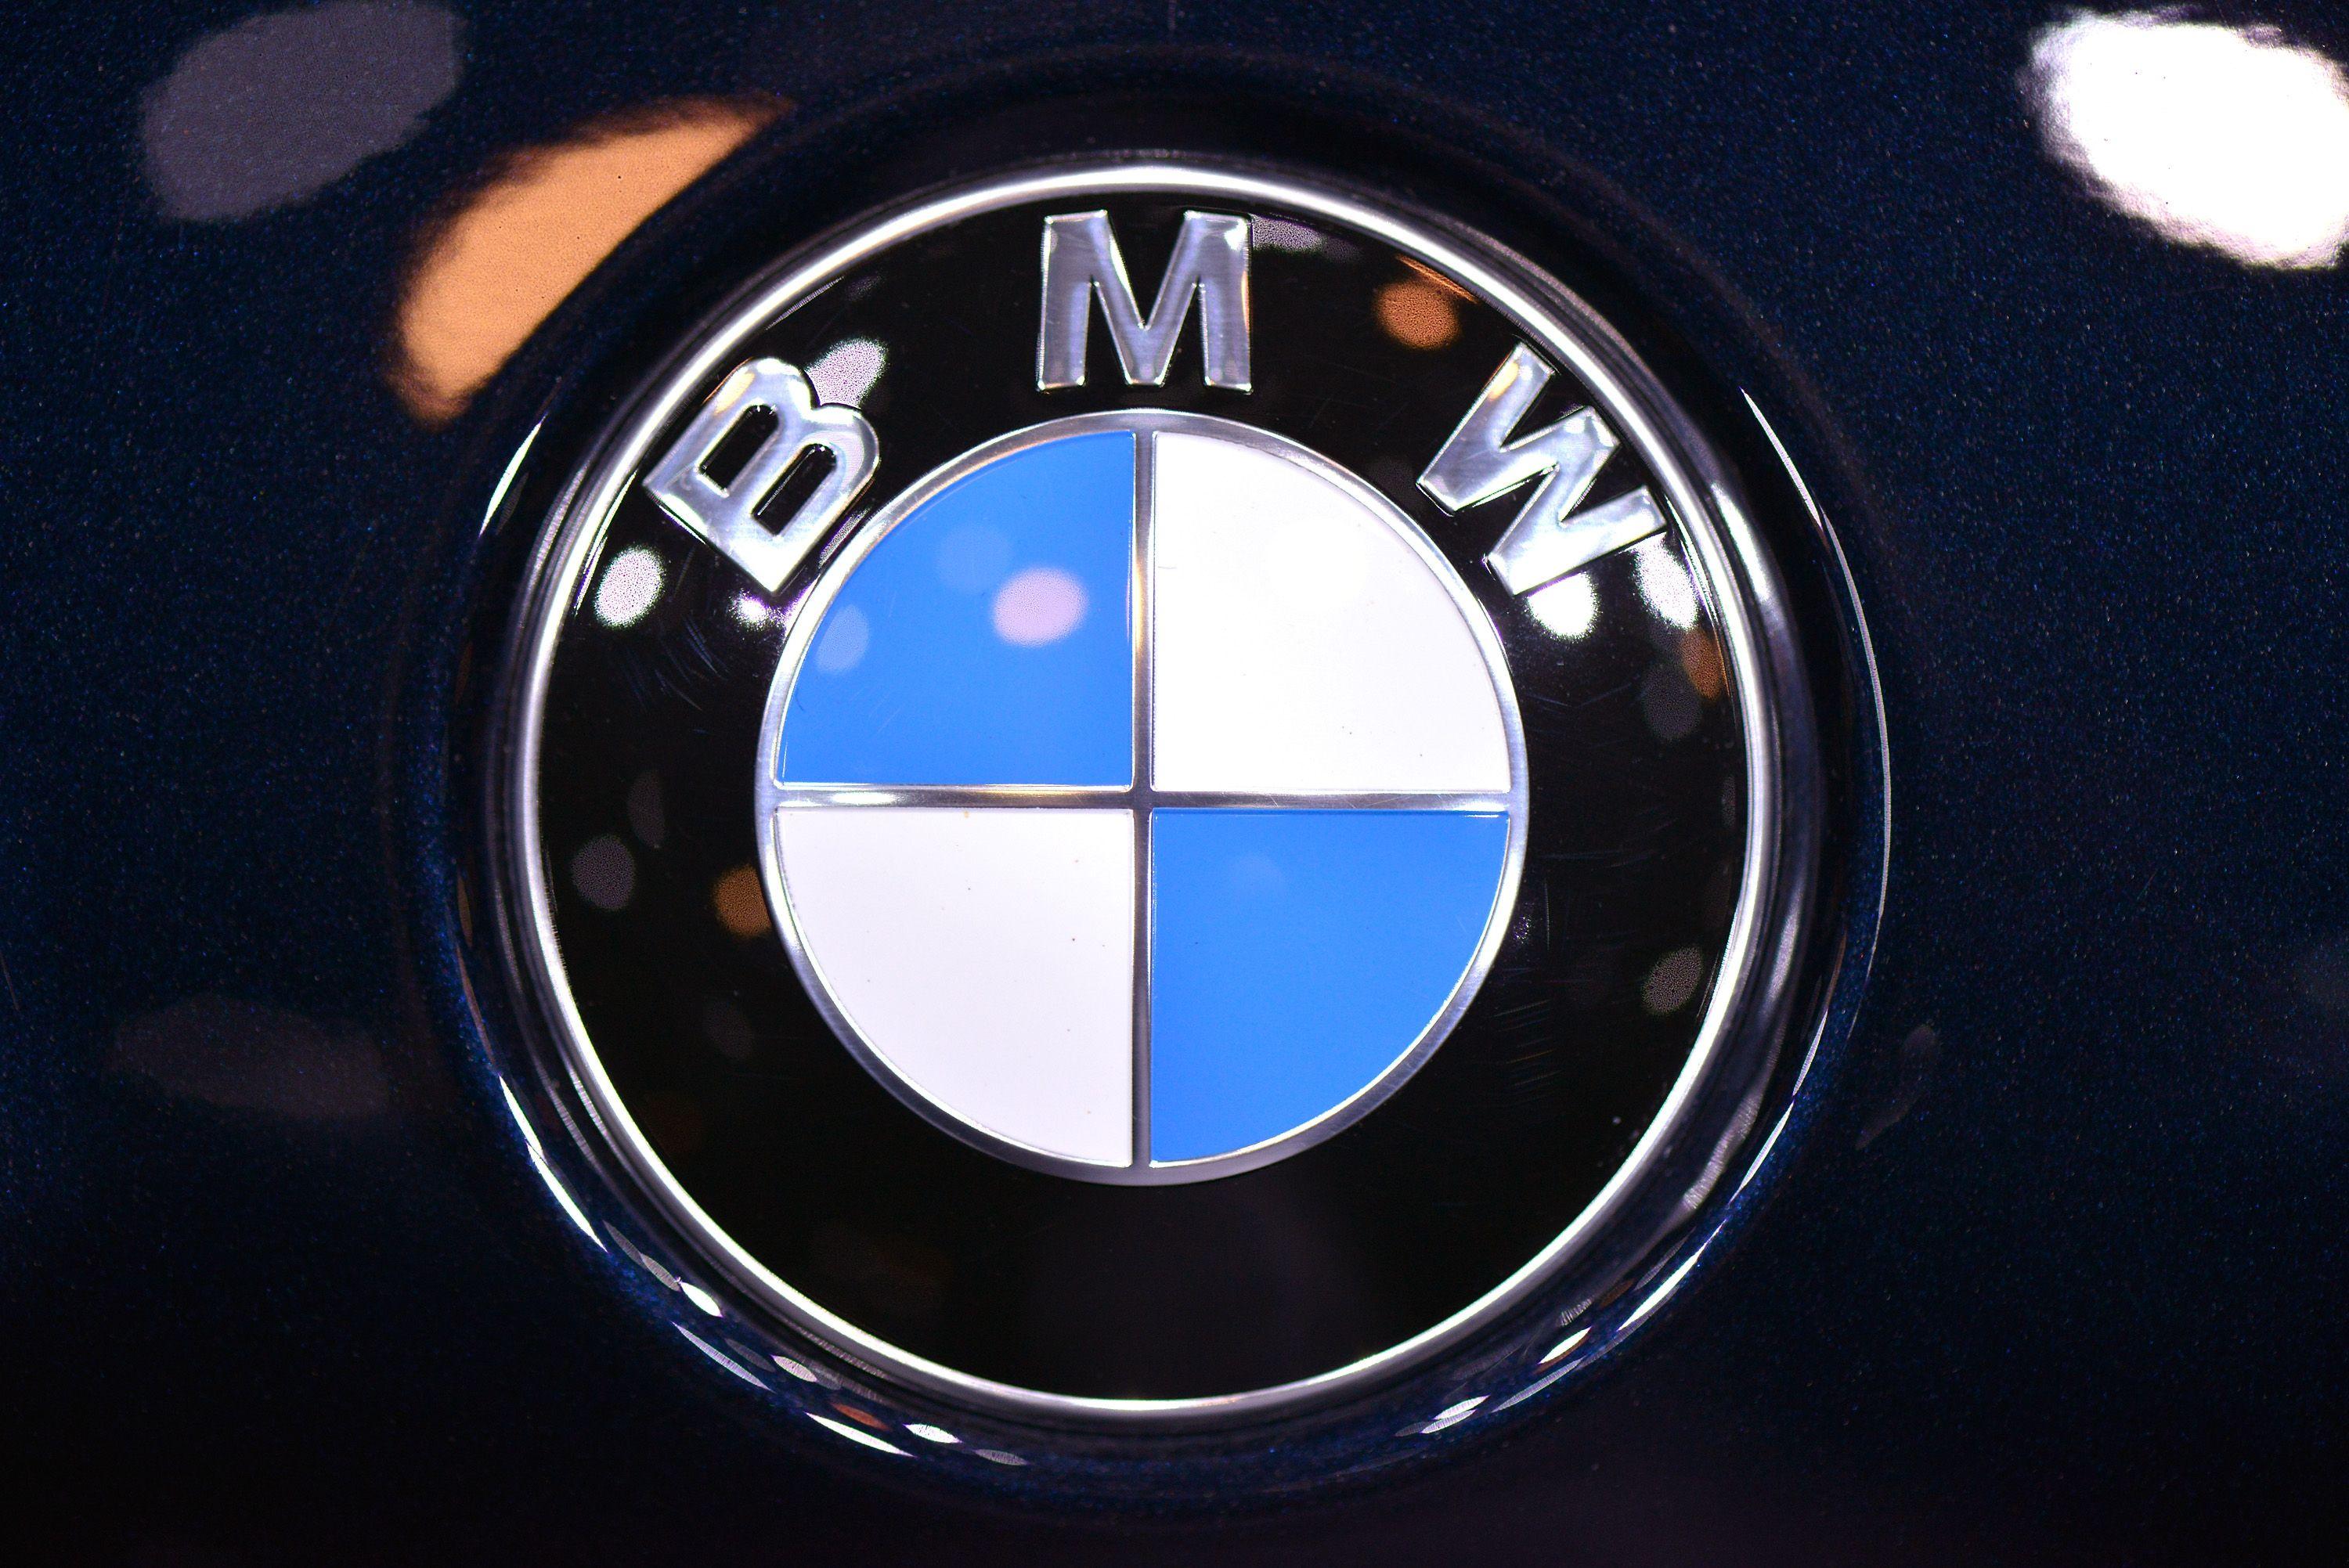 Leading Car Part Manufacturer Logo - How BMW became the top-selling luxury car company in the US | Fortune